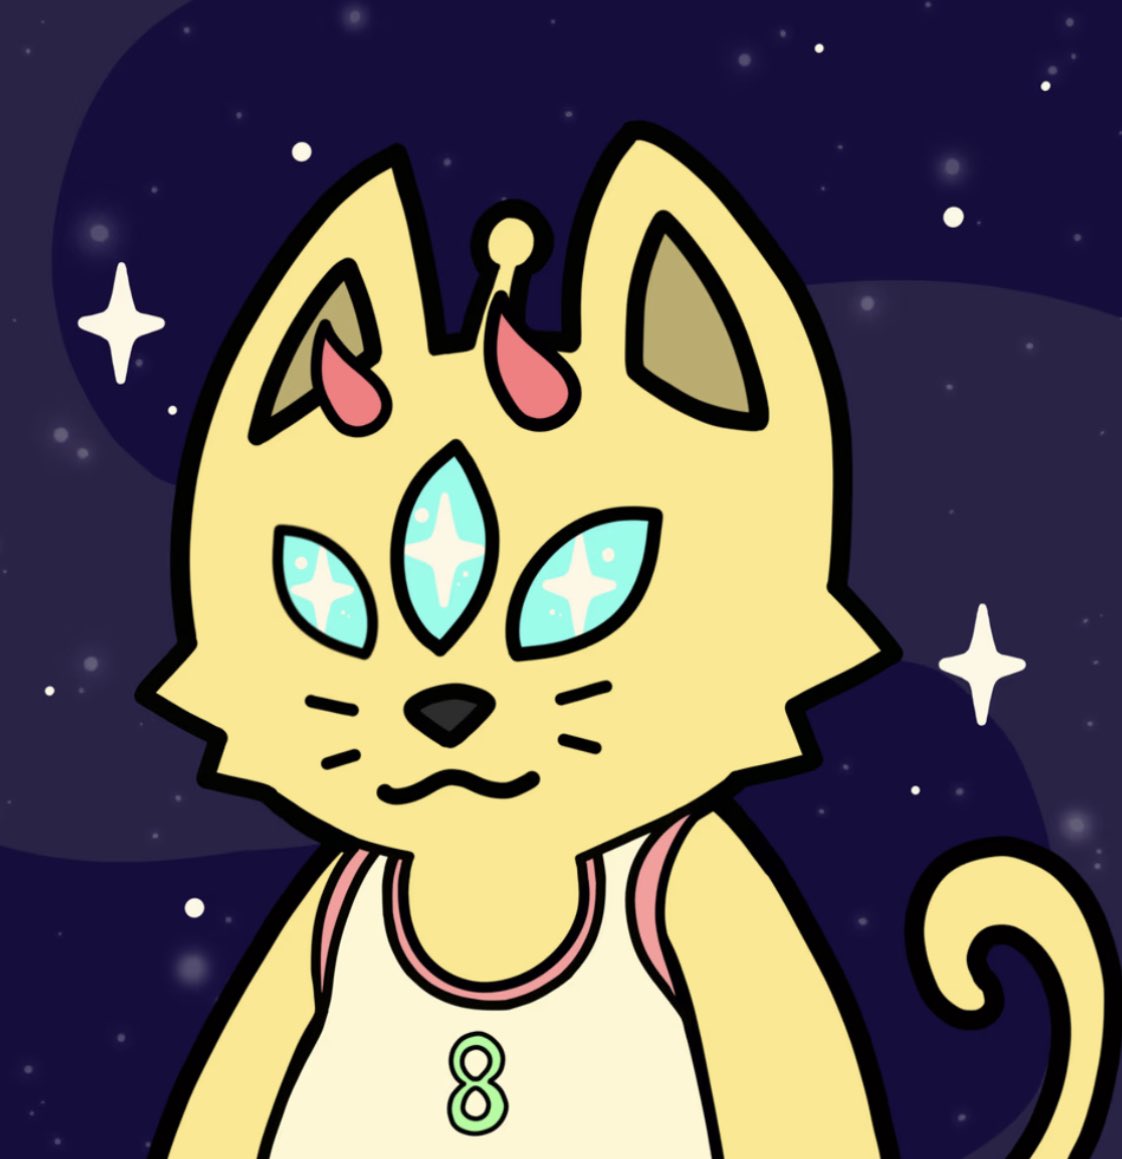 LETS PLAY A GAME! PRIZE IS THIS COSMIC CAT! How to play: Comment below 👇🏻 whoever has the LEAST amount of likes on their comment after 48 hours wins! (must like + RT & follow) #NFTs #NFTGiveaways